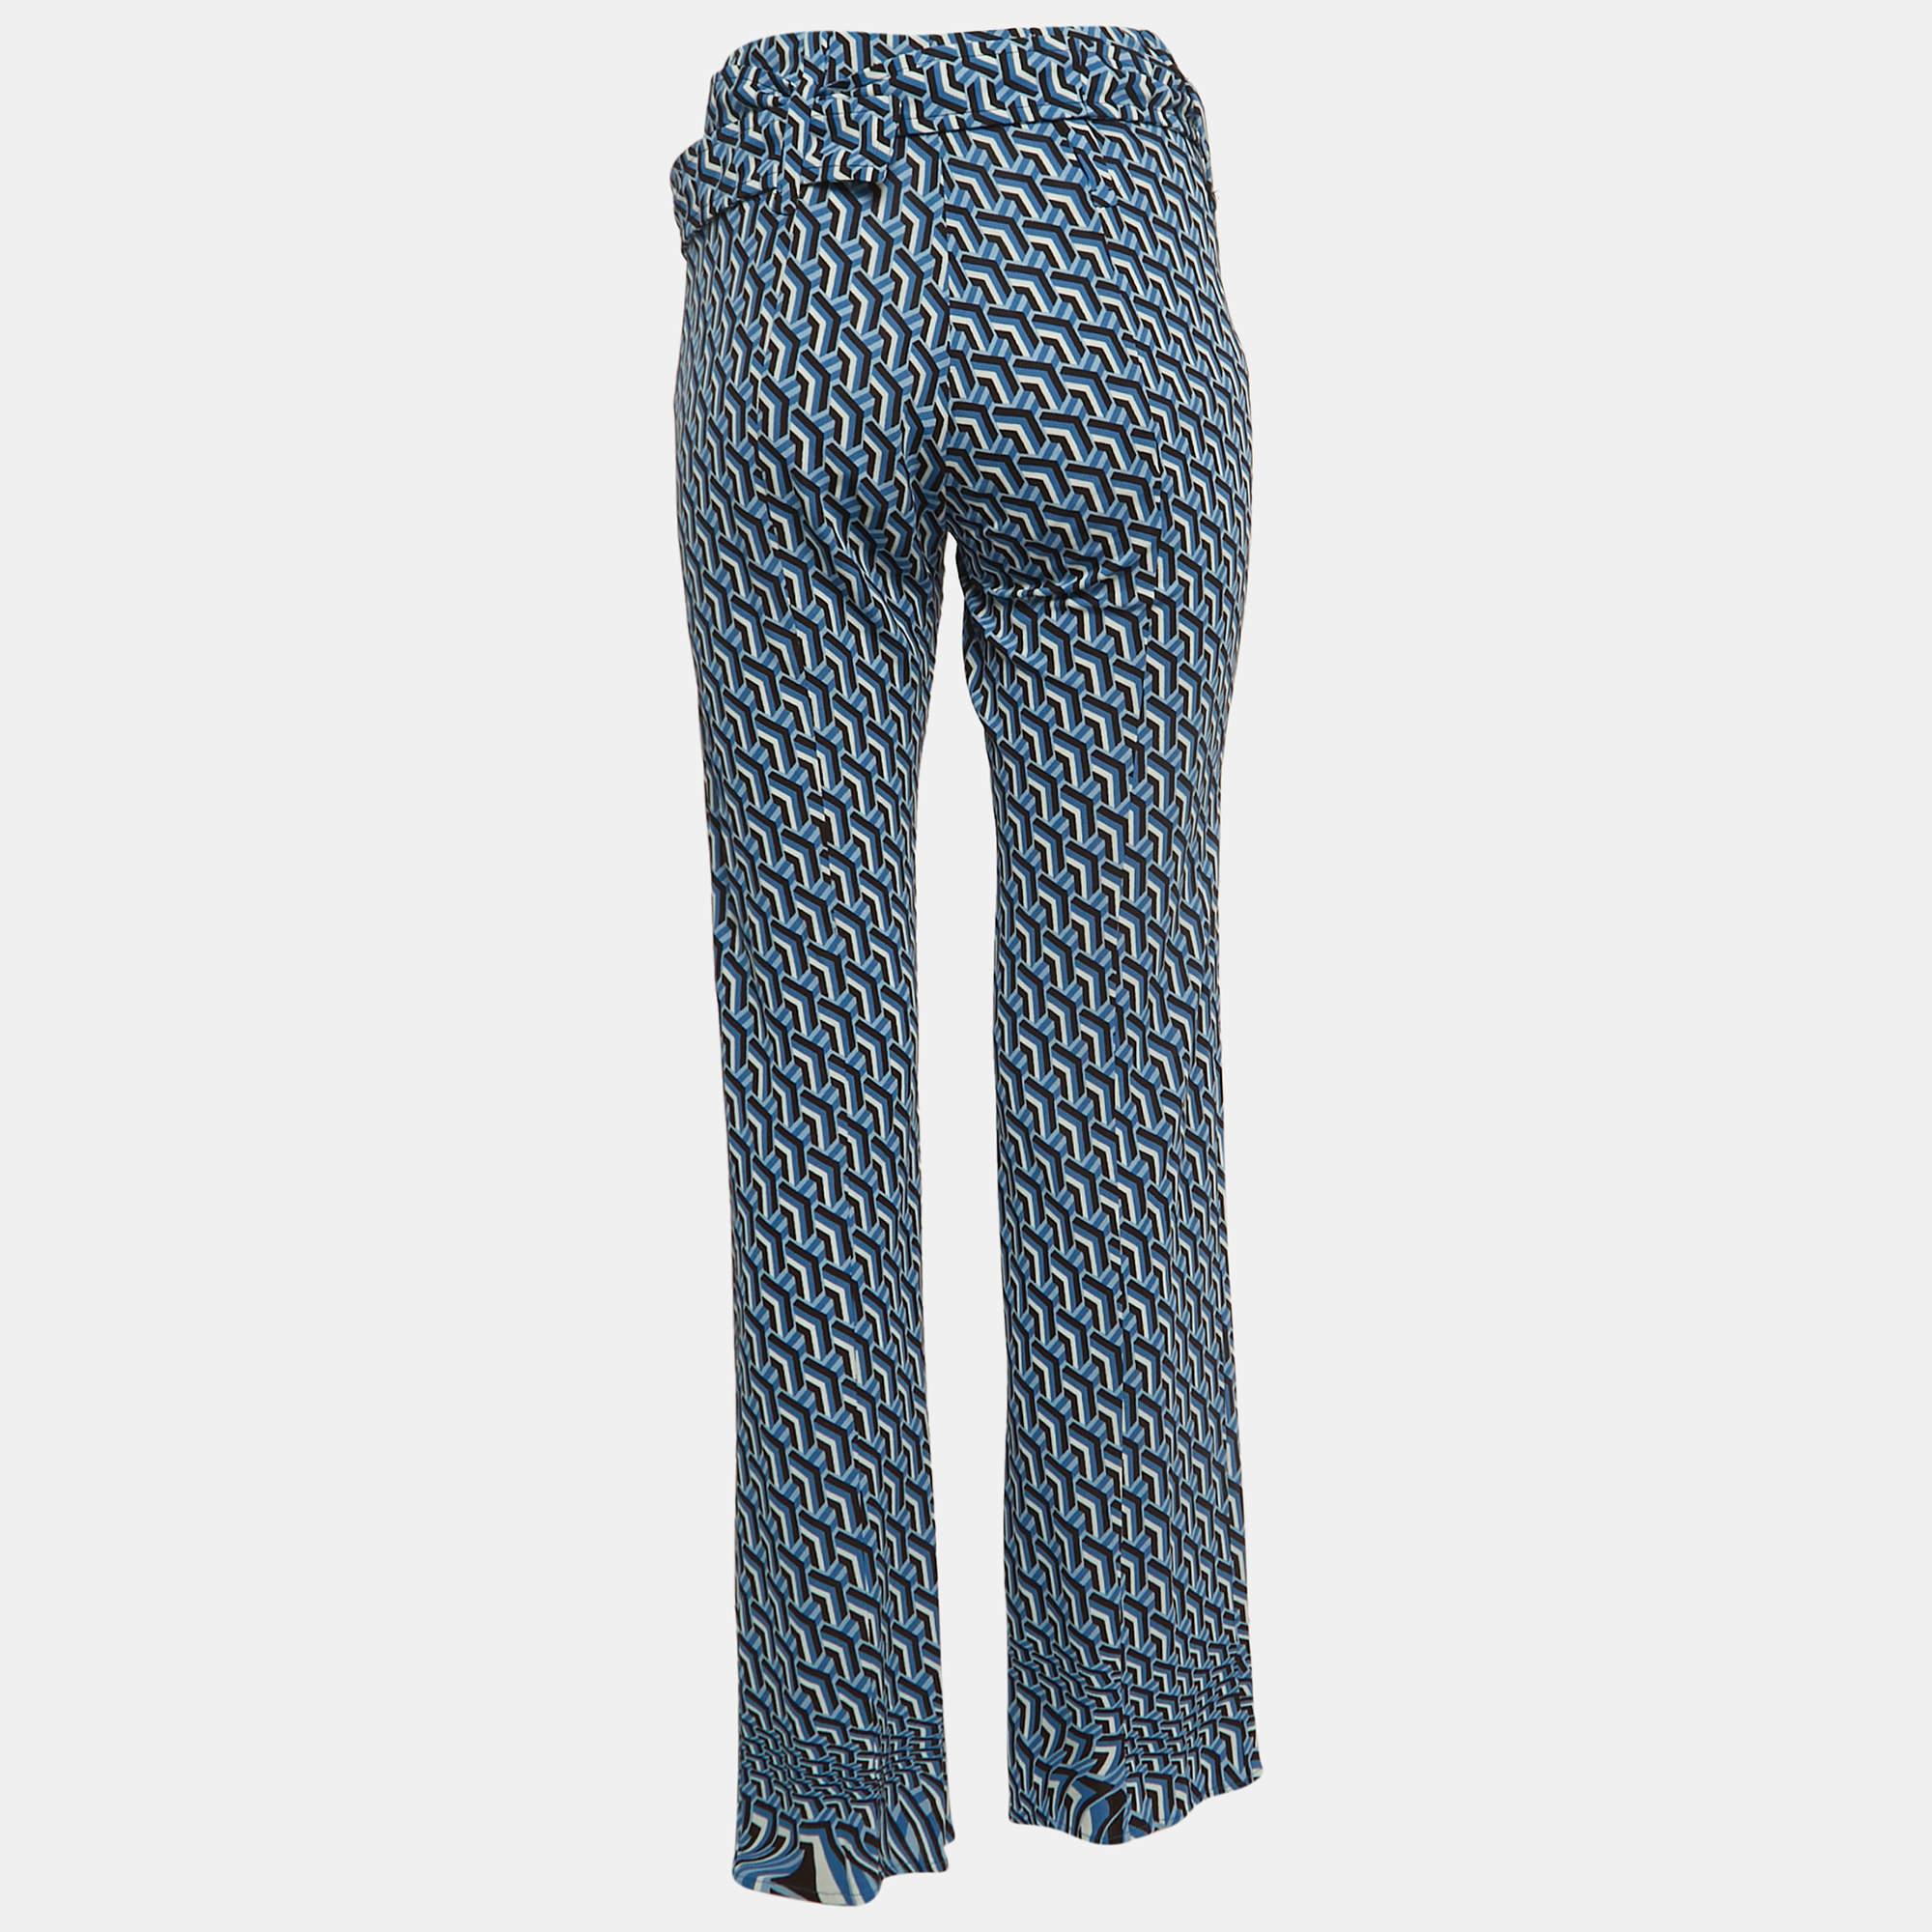 Impeccably tailored pants are a staple in a well-curated wardrobe. These designer pants are finely sewn to give you the desired look and all-day comfort.

